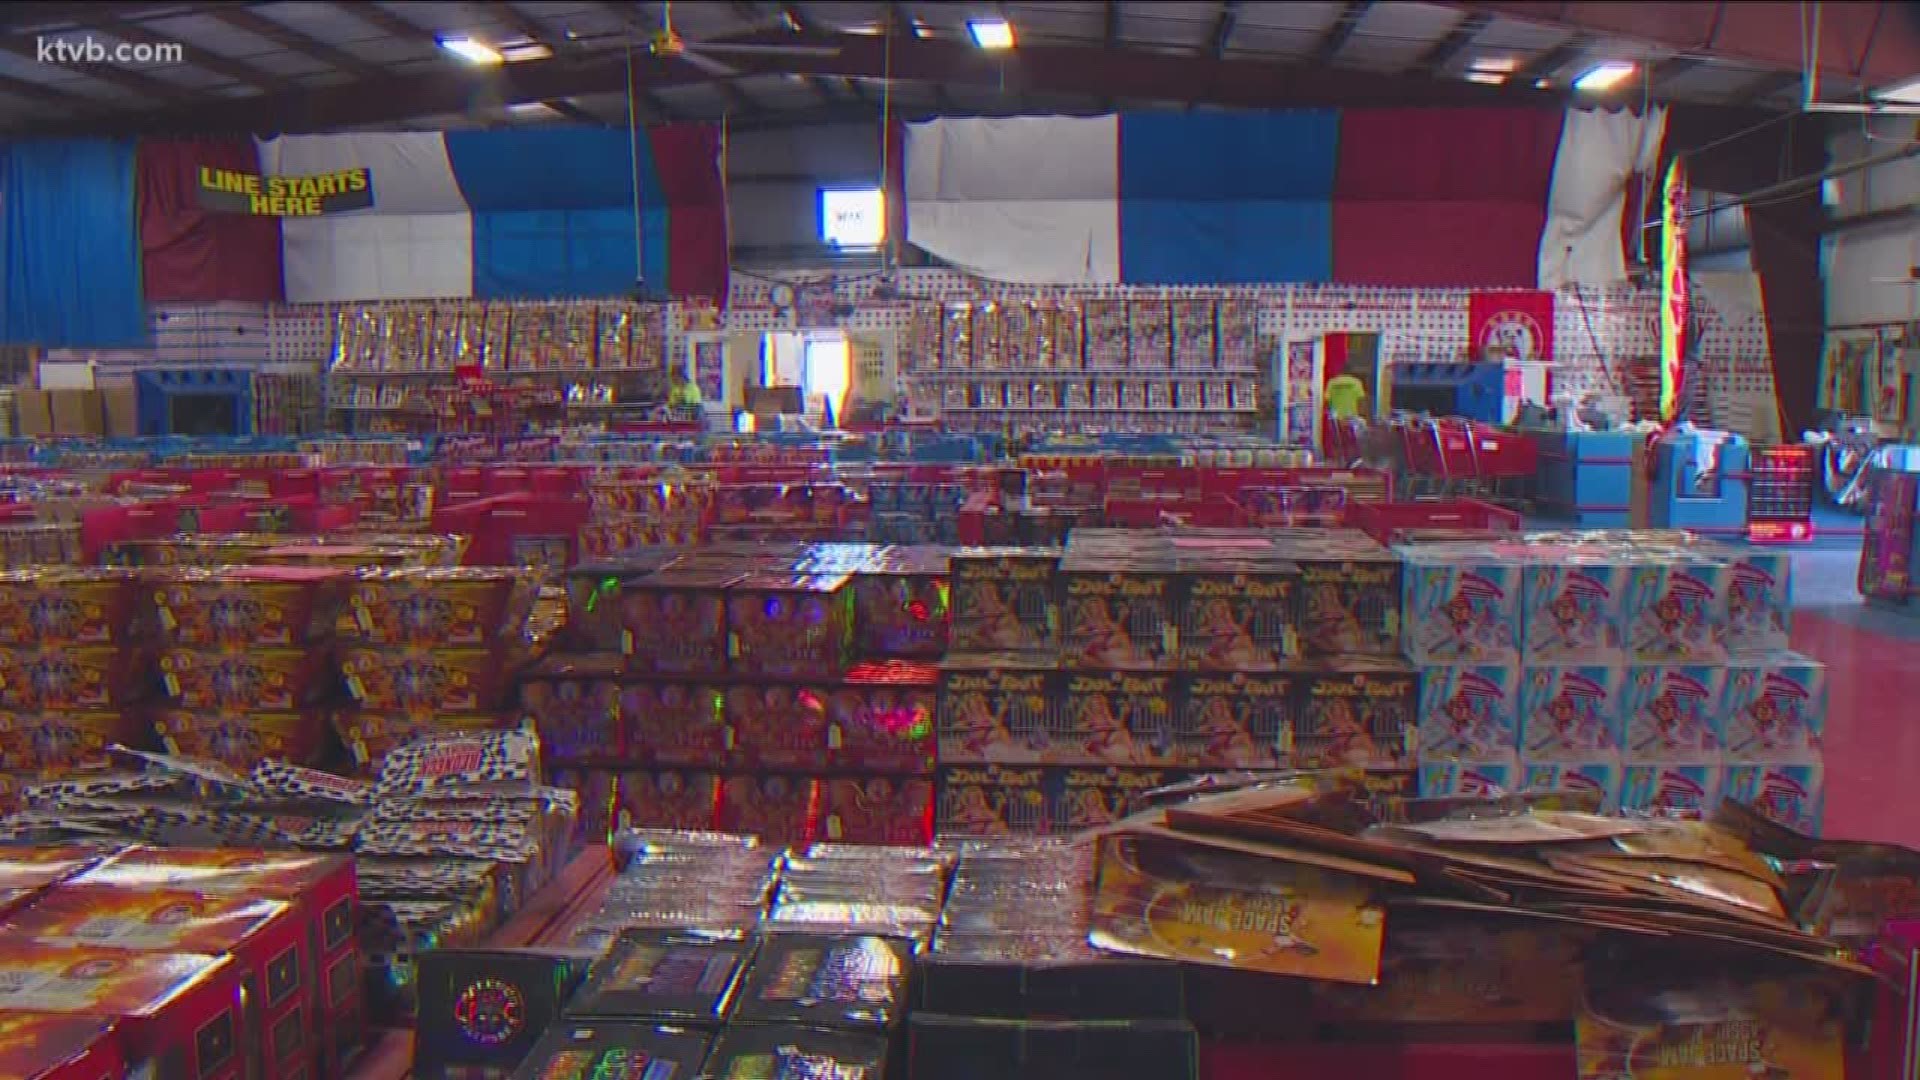 Just because some firework stands sell aerial fireworks, doesn't mean it's safe or legal for people to use.